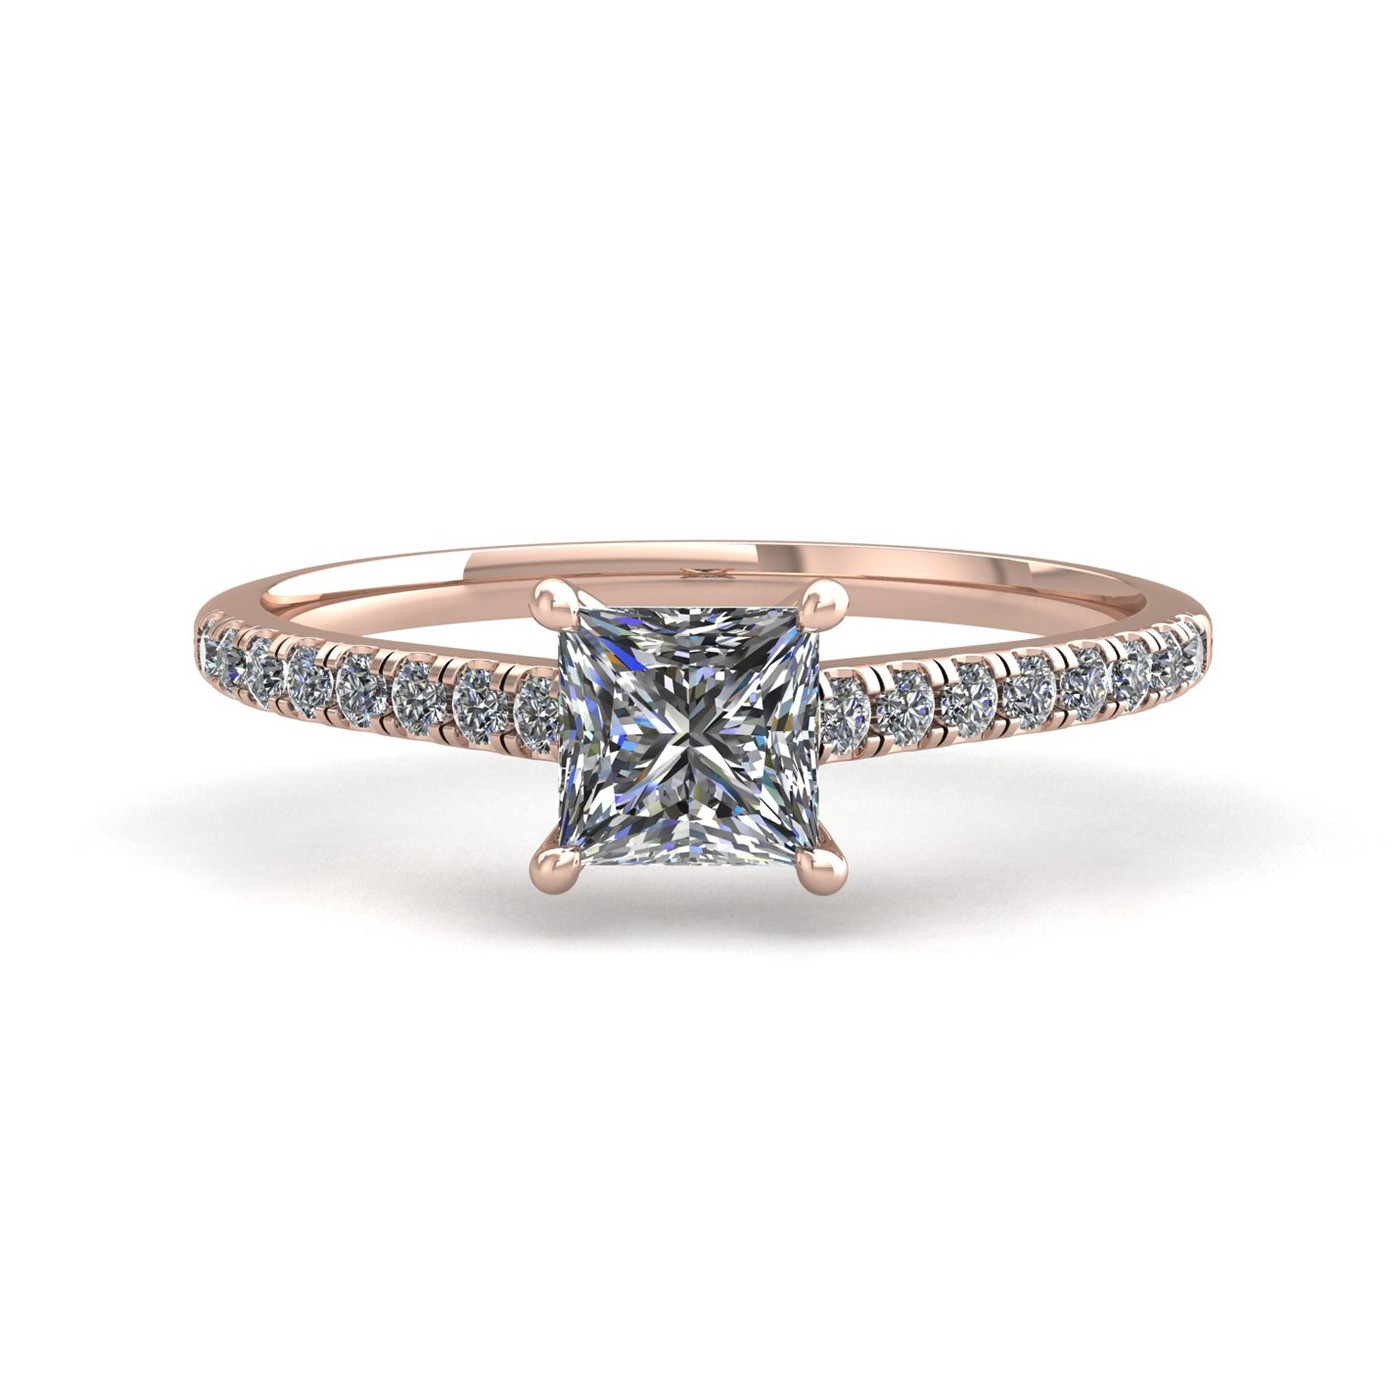 18k rose gold 1,50 ct 4 prongs princess cut diamond engagement ring with whisper thin pavÉ set band Photos & images